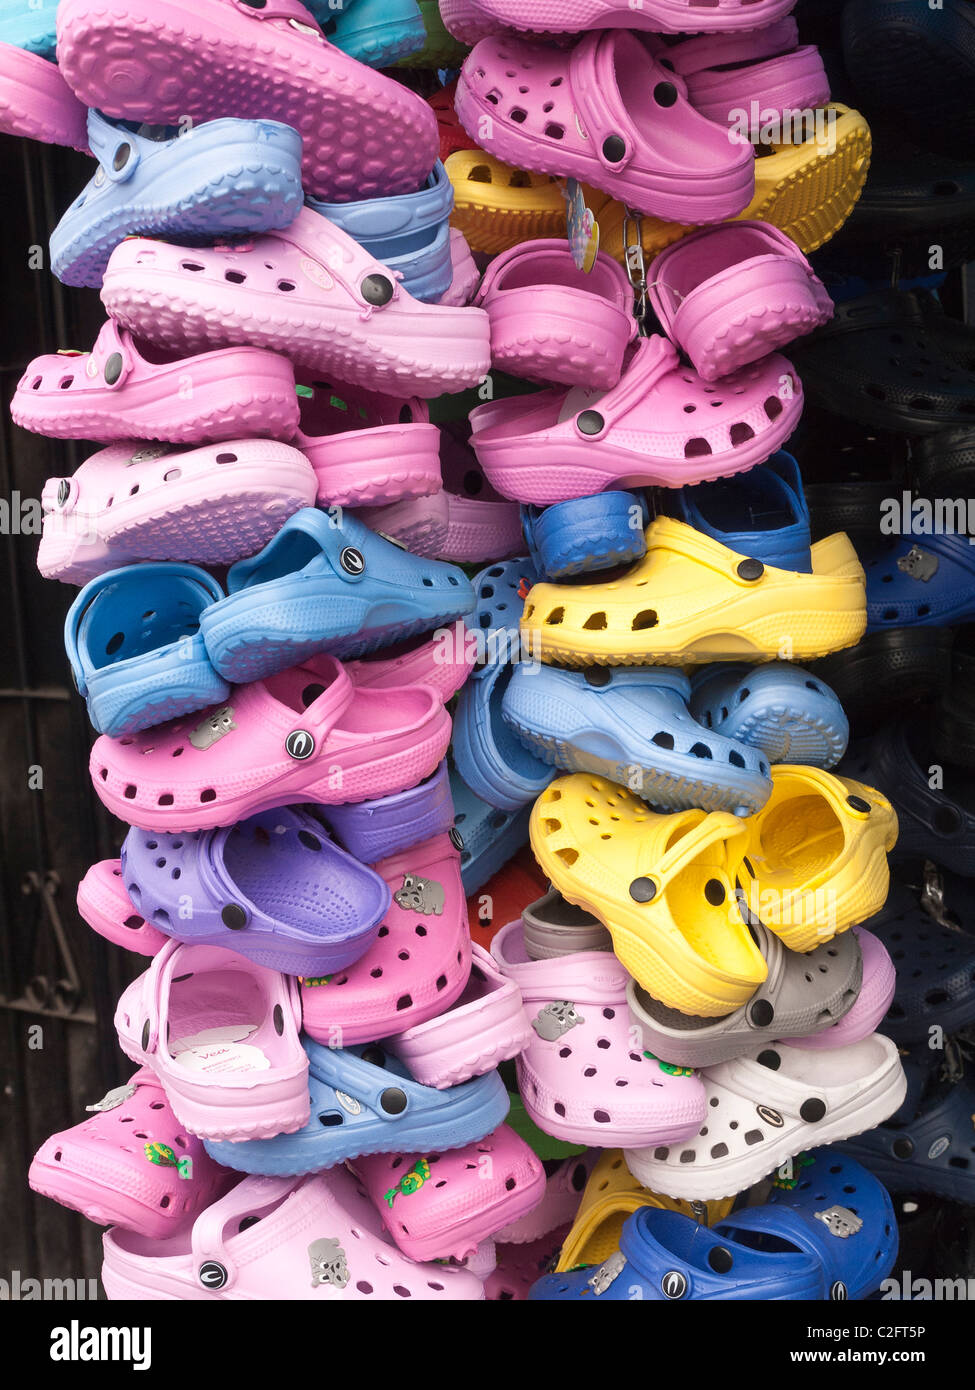 Crocs Plastic Shoes High Resolution Stock Photography and Images - Alamy